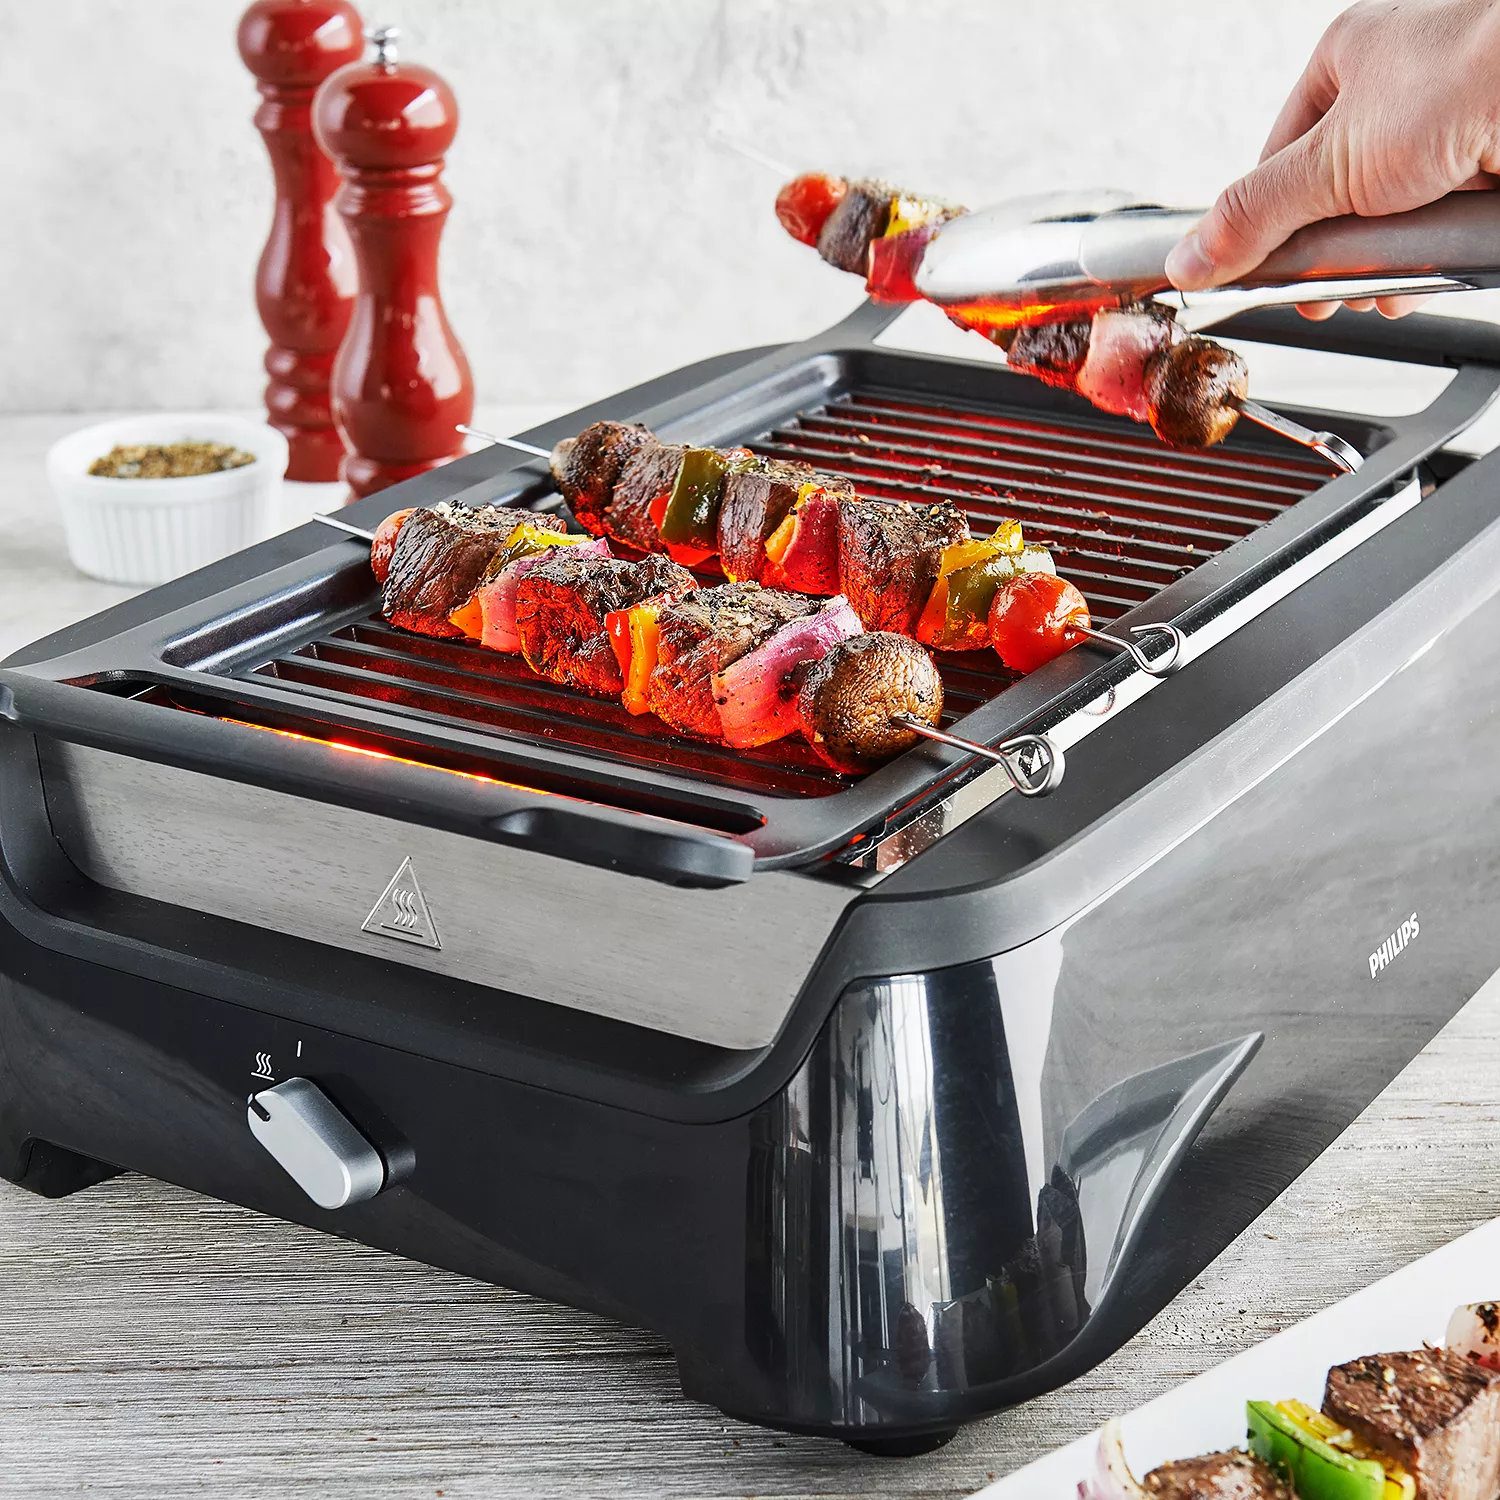 Philips Indoor Smoke-Less Grill